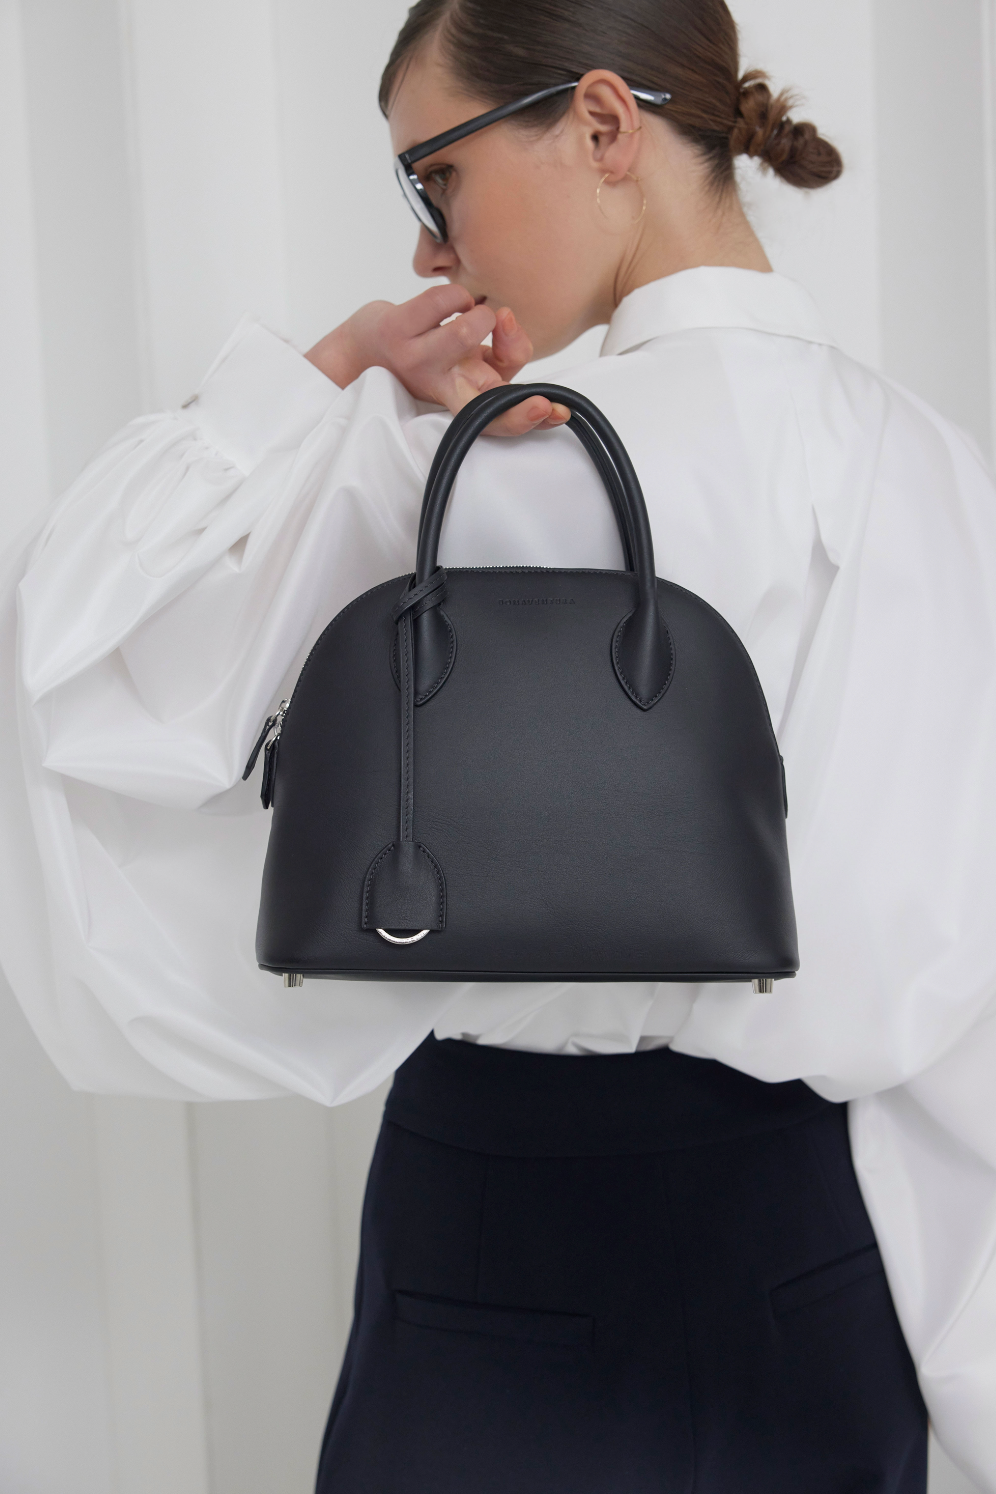 Stylish woman carries a large Emma bag that is perfect for everyday office life.